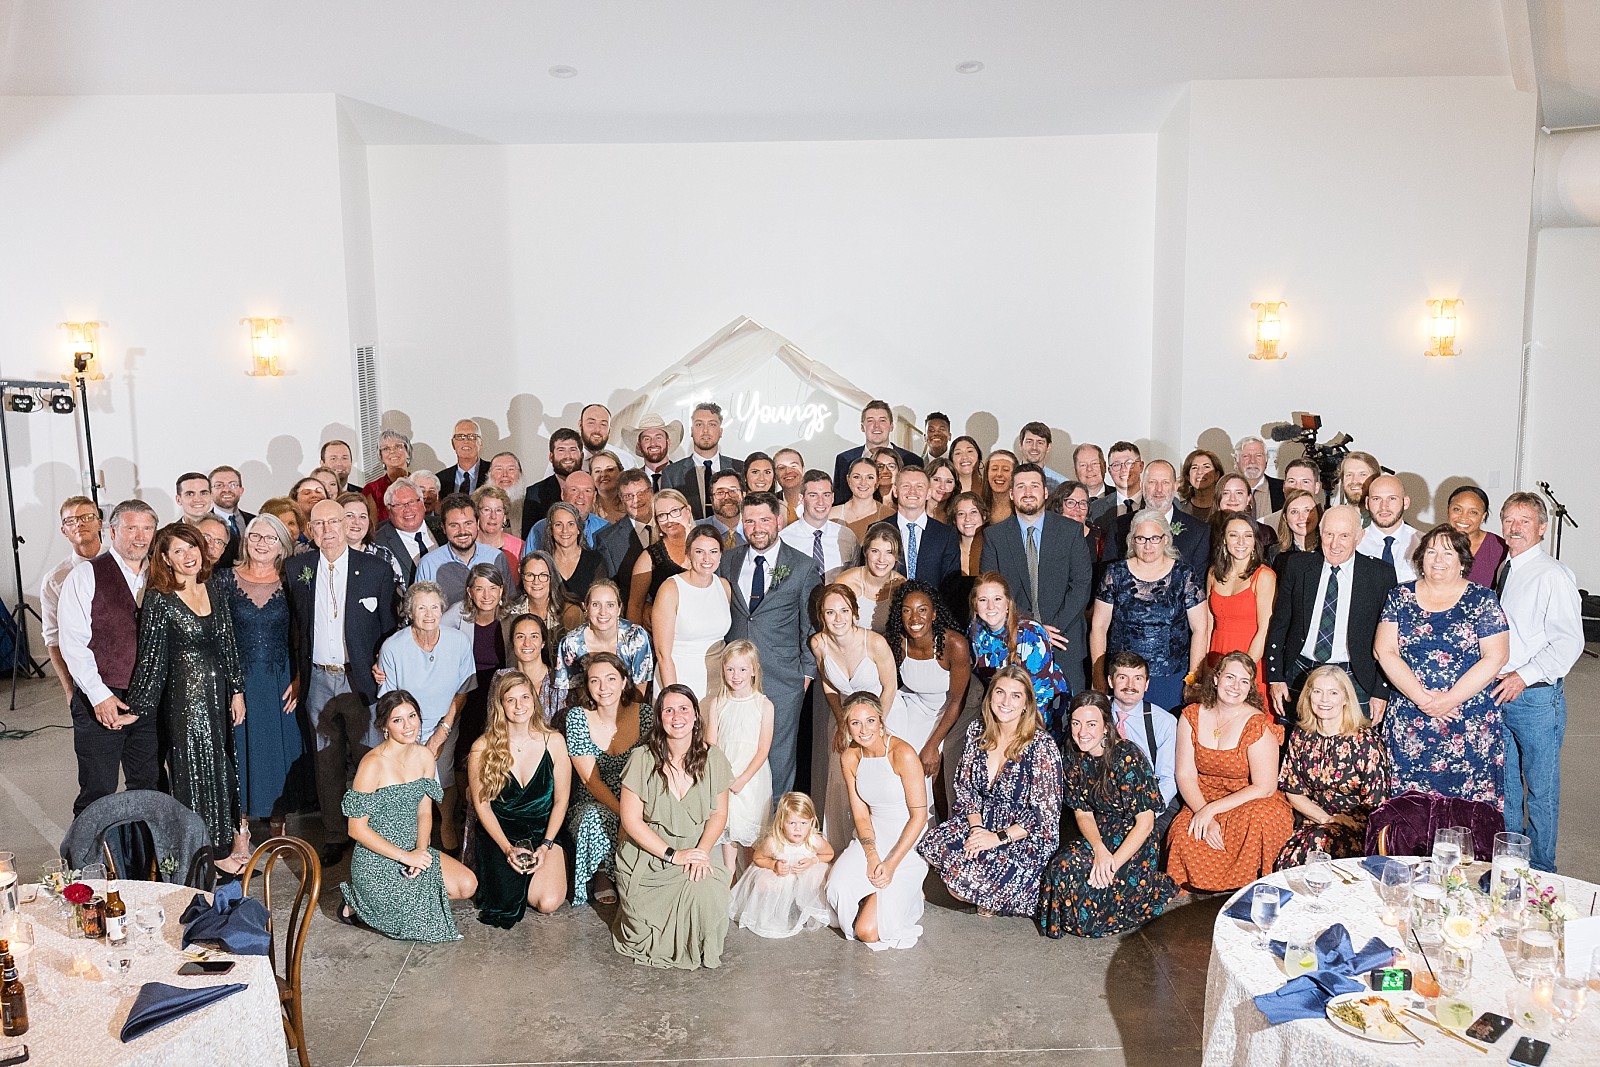 Group photo of all wedding guests at The Upchurch in Cary NC | Raleigh NC Wedding Photography | Sarah Hinckley Photography